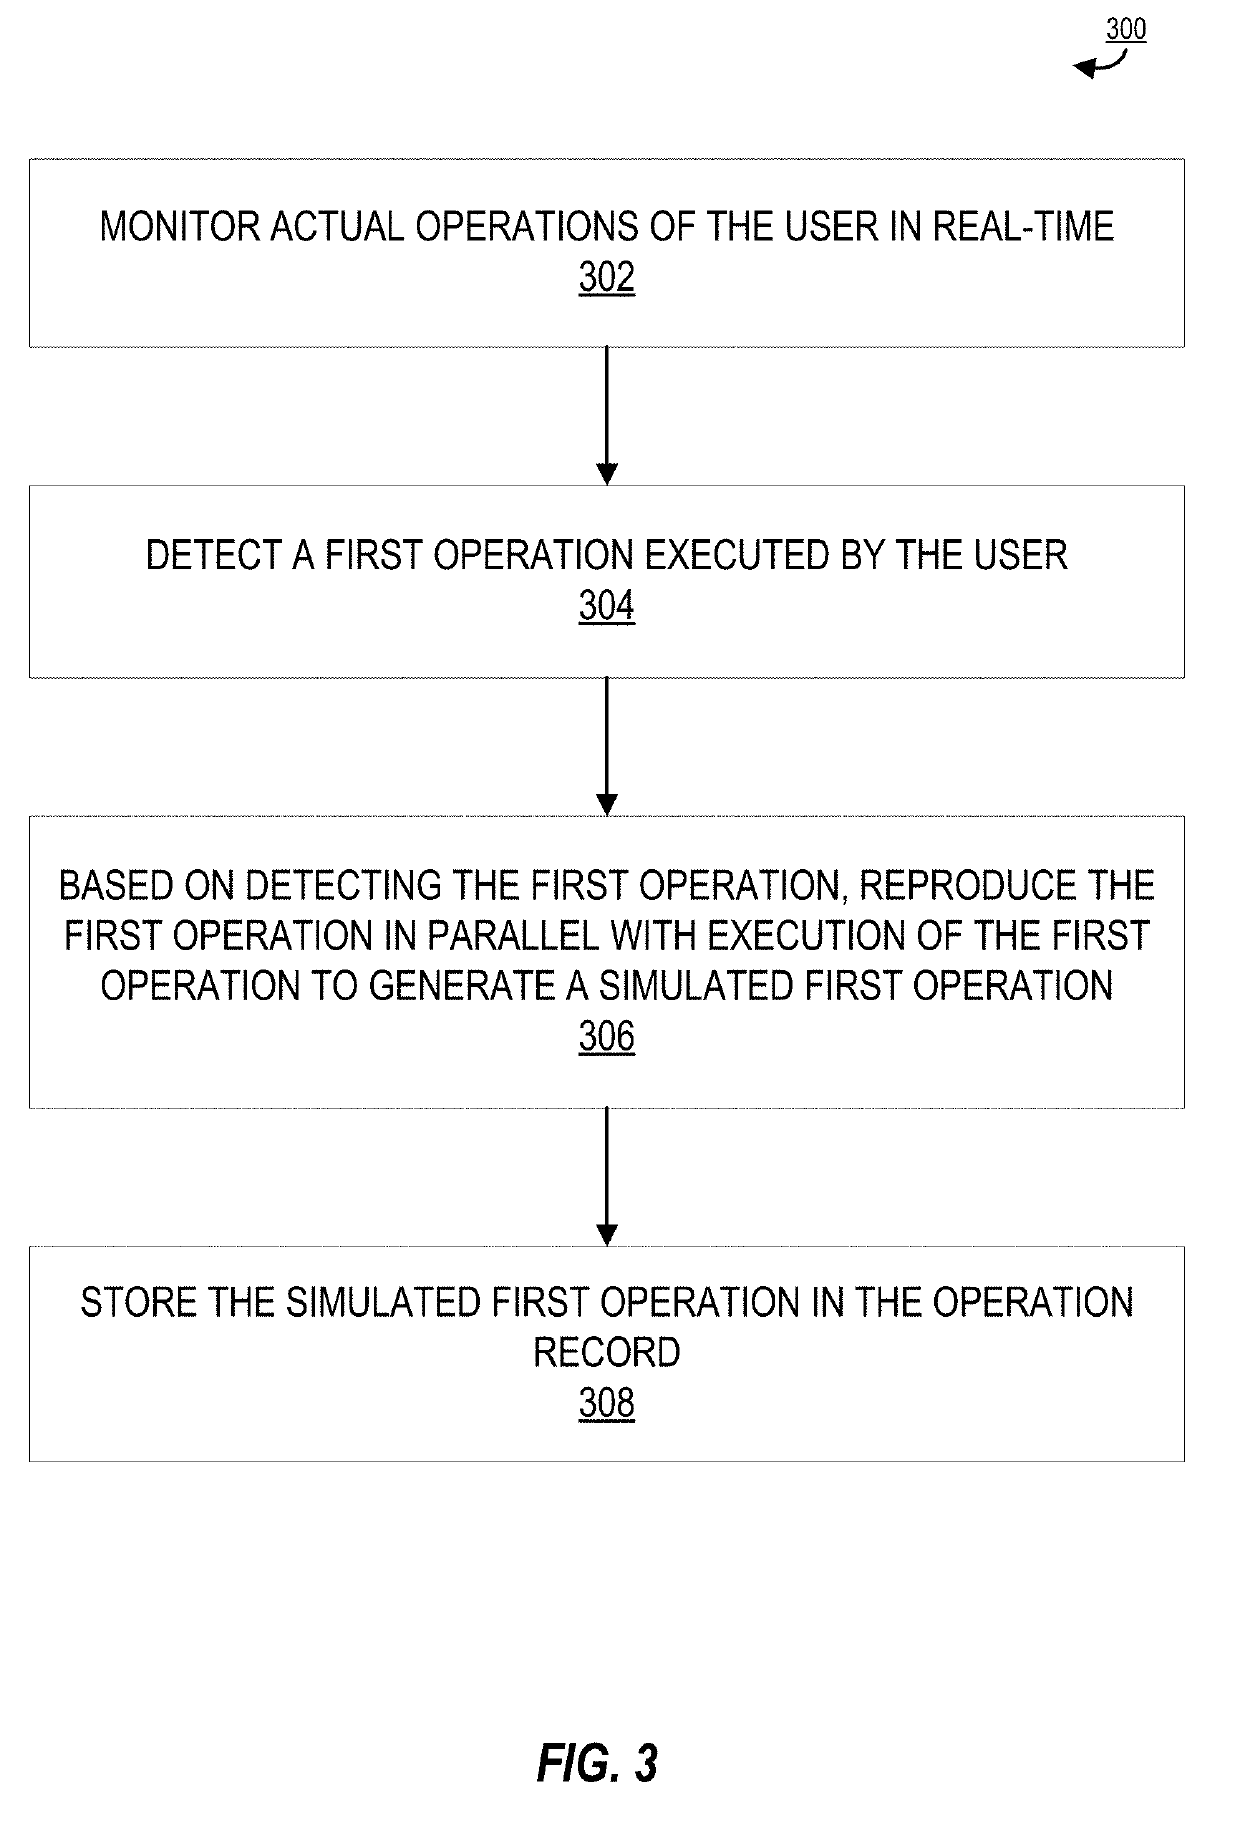 Robotic process automation enabled file dissection for error diagnosis and correction